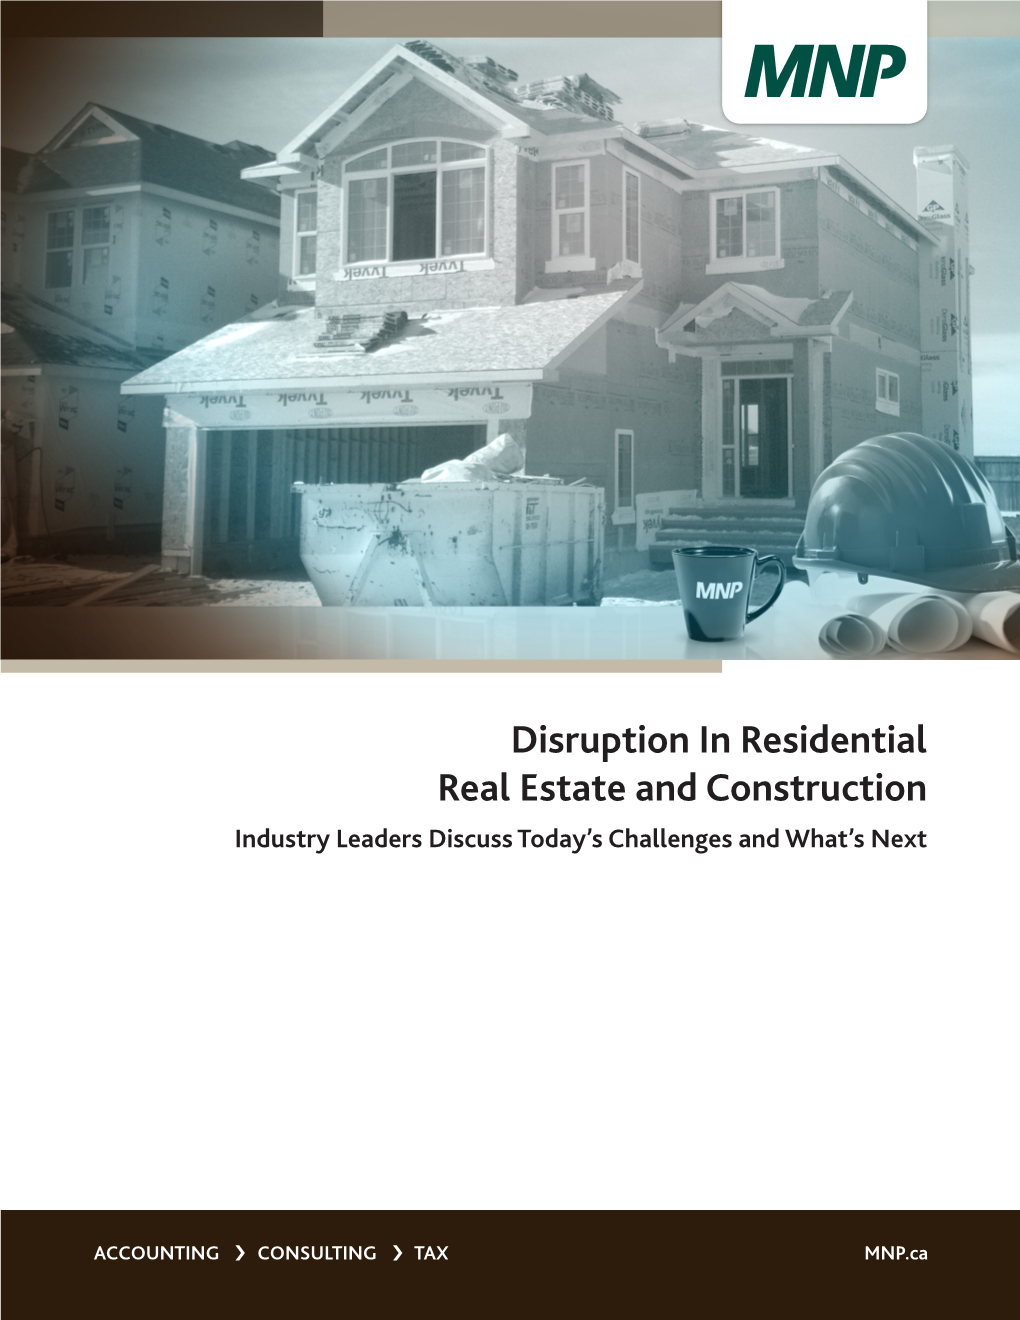 Disruption in Residential Real Estate and Construction